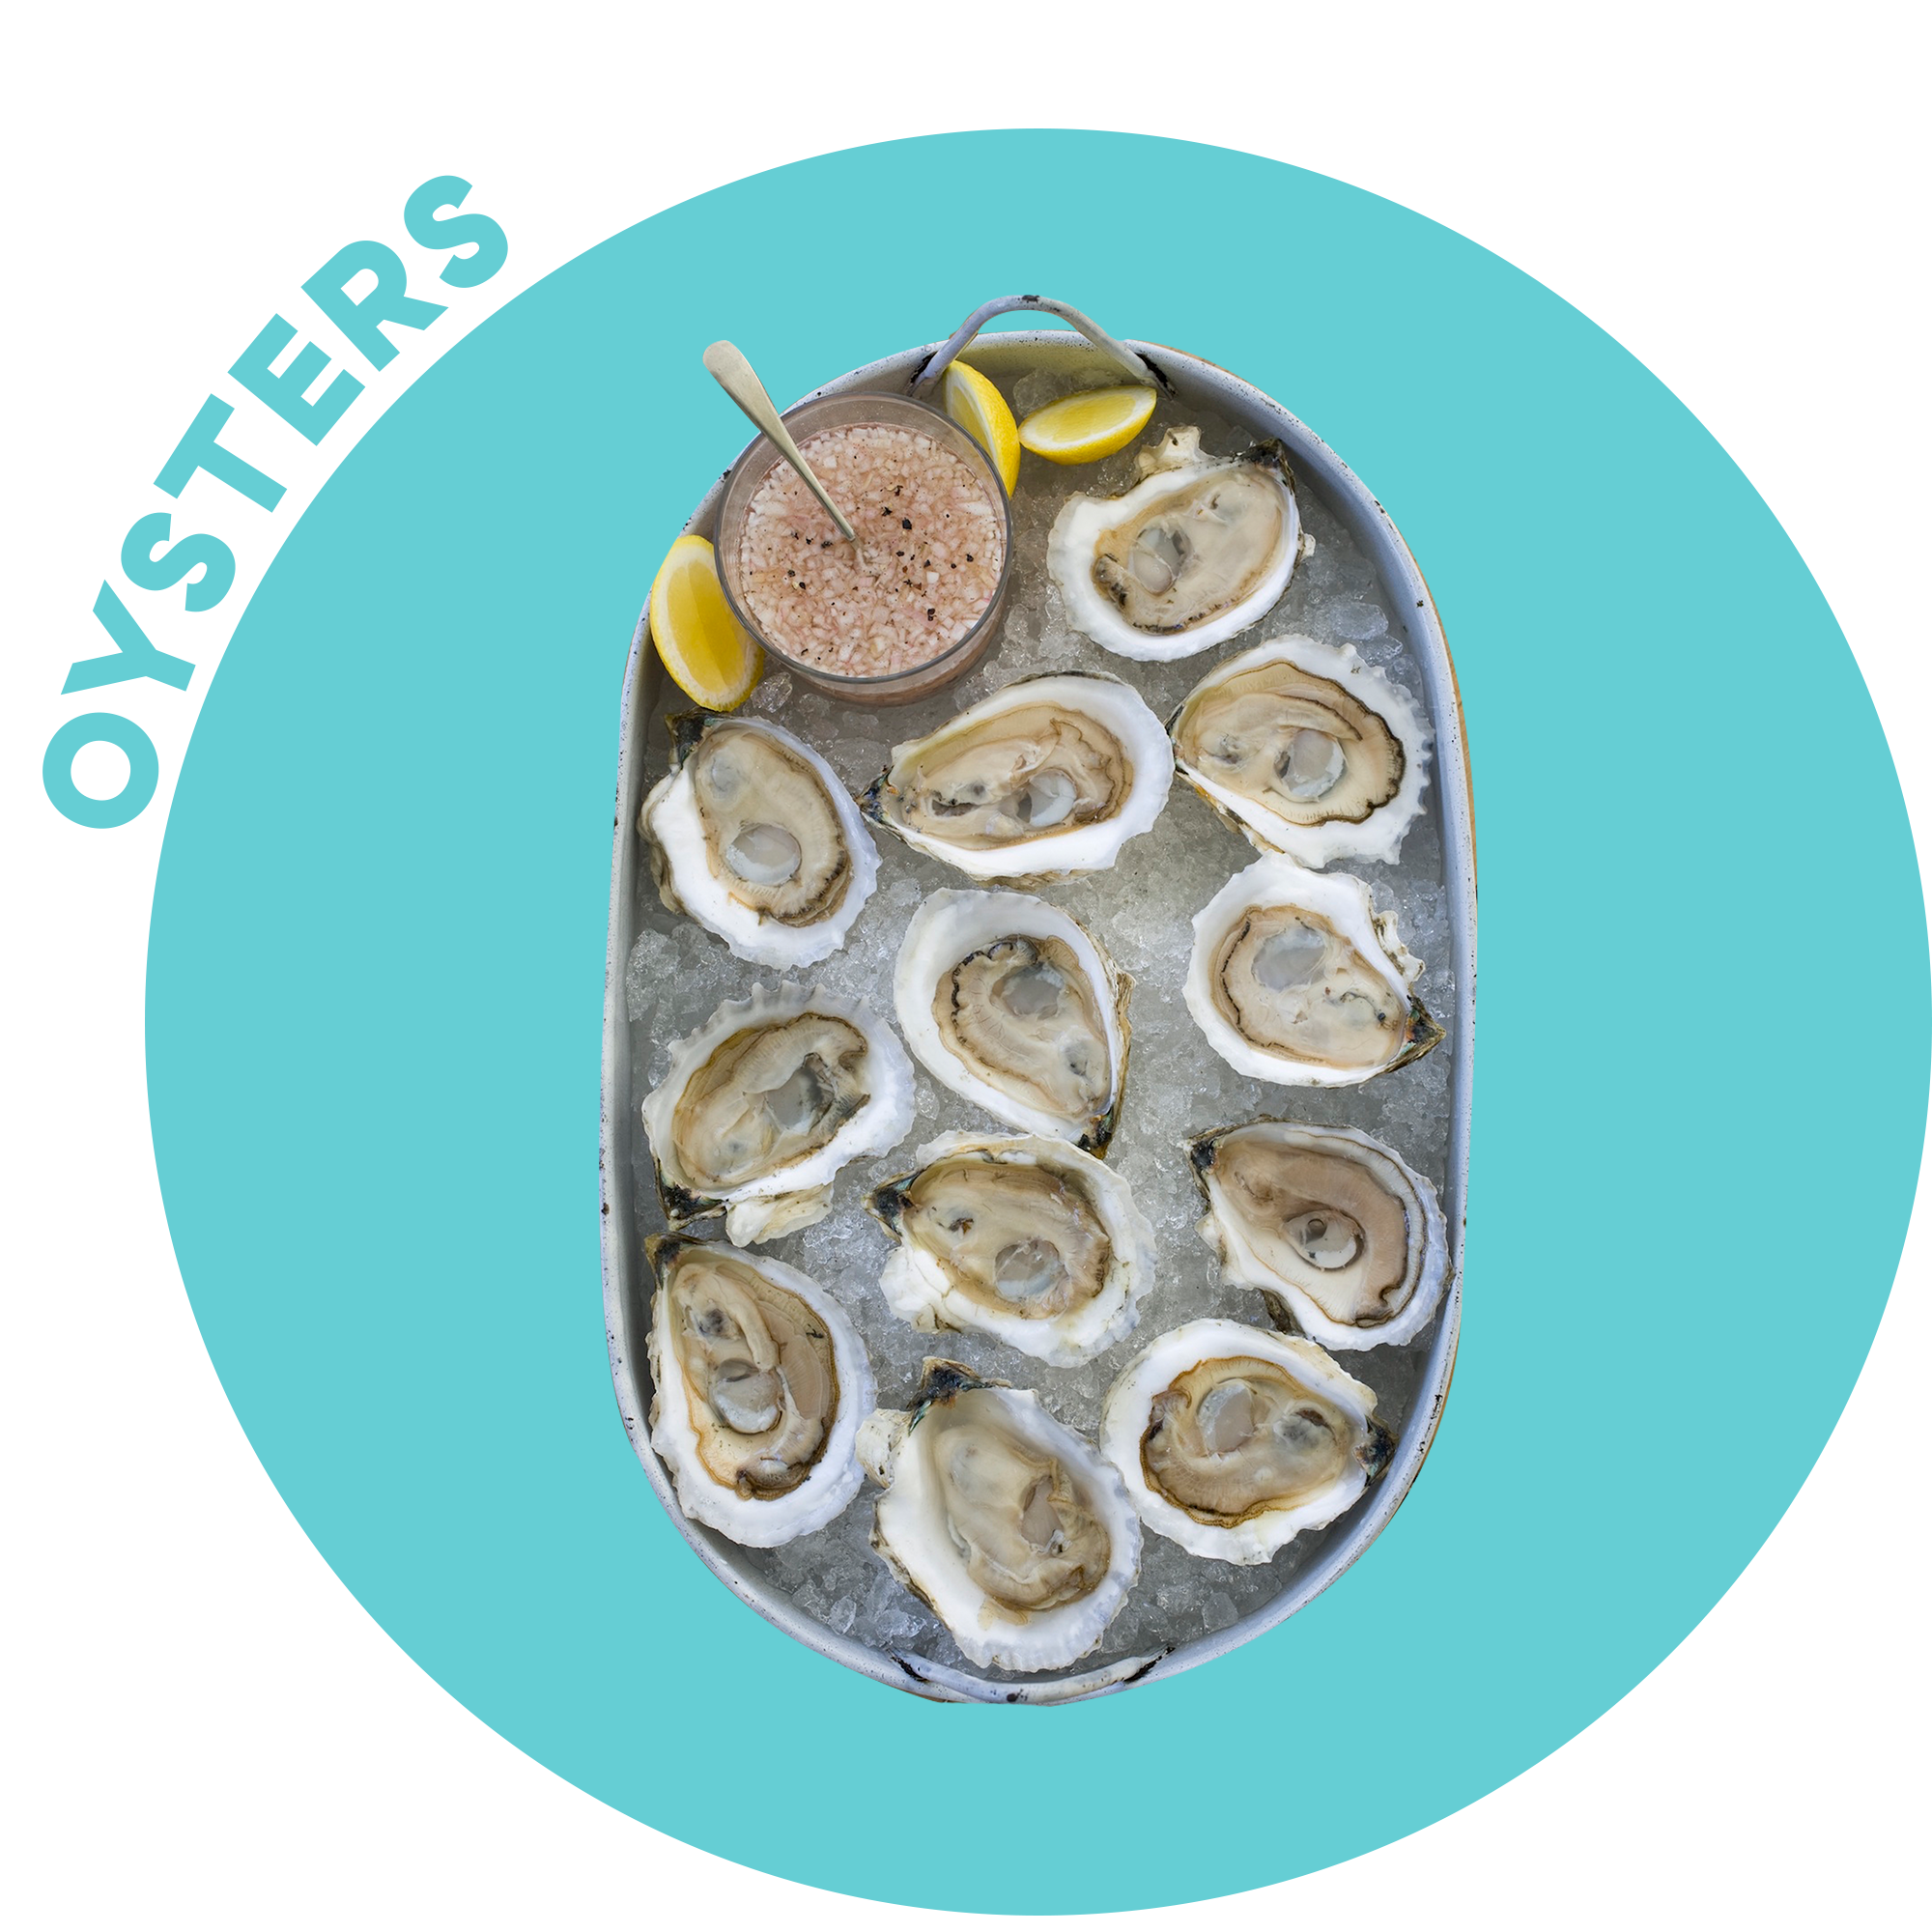 Food, Dish, Oyster, Seafood, Cuisine, Bivalve, Ingredient, Fish, Clam, Deviled egg, 